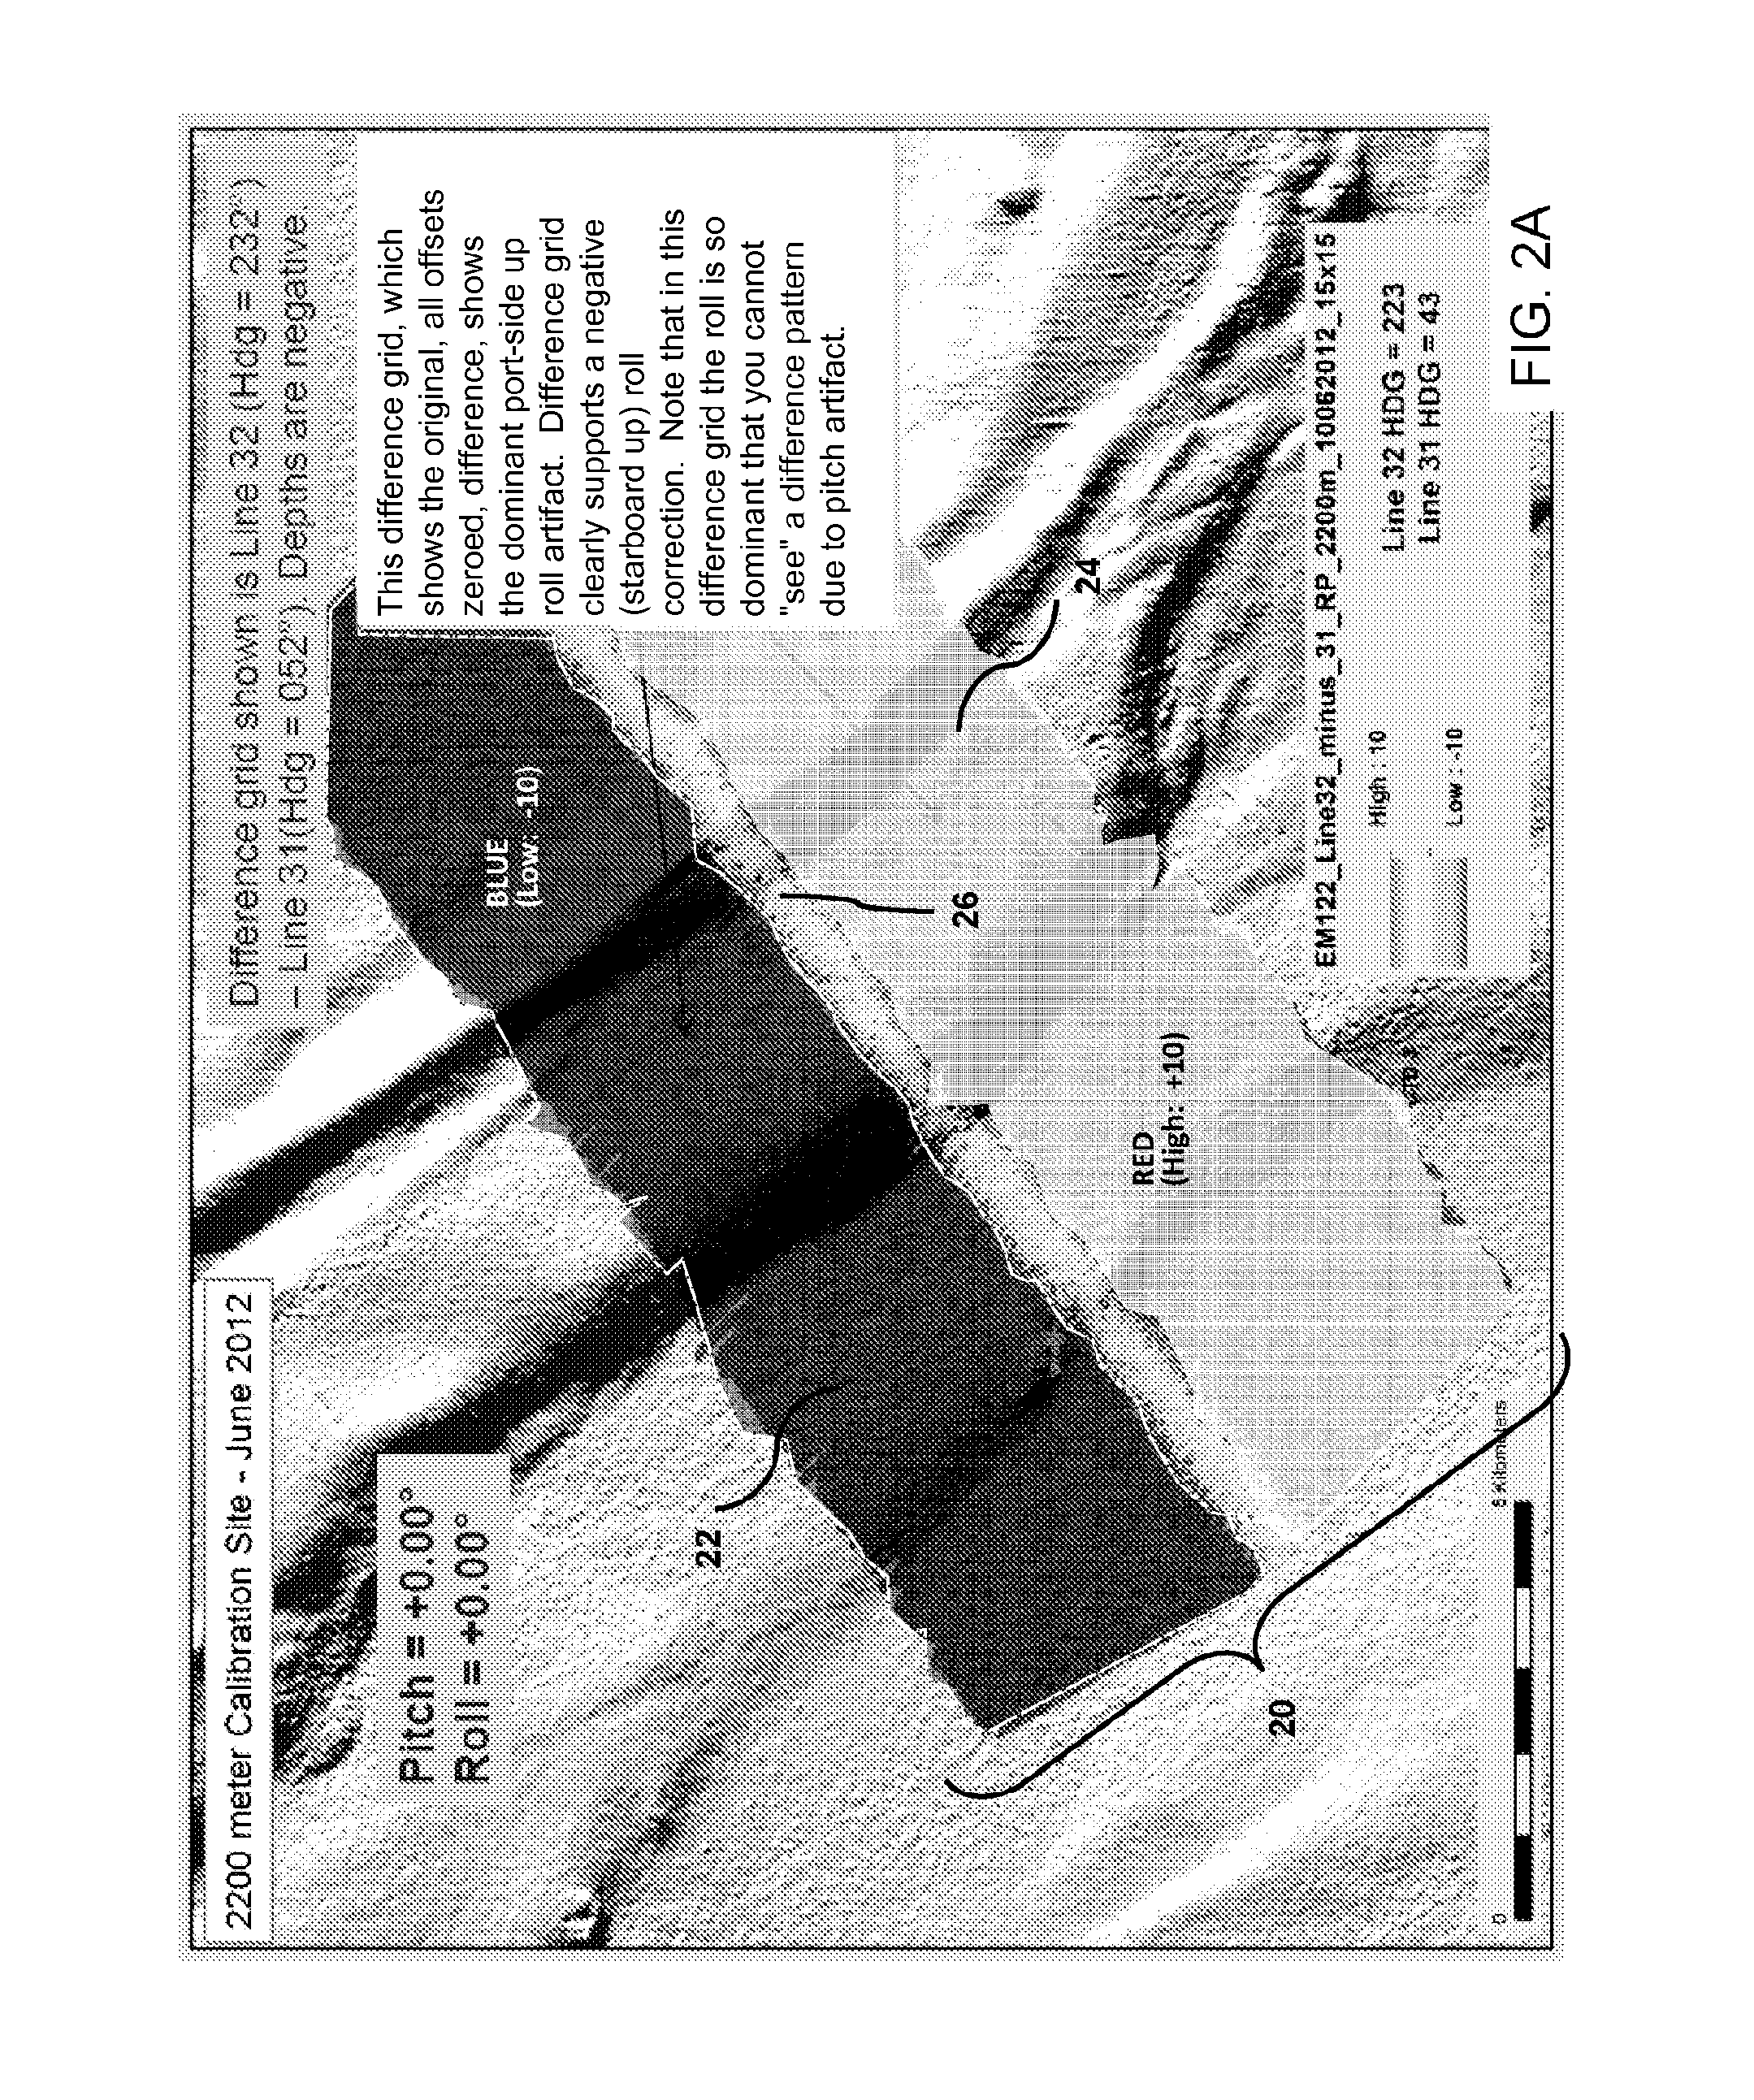 System and method for calibration of echo sounding systems and improved seafloor imaging using such systems